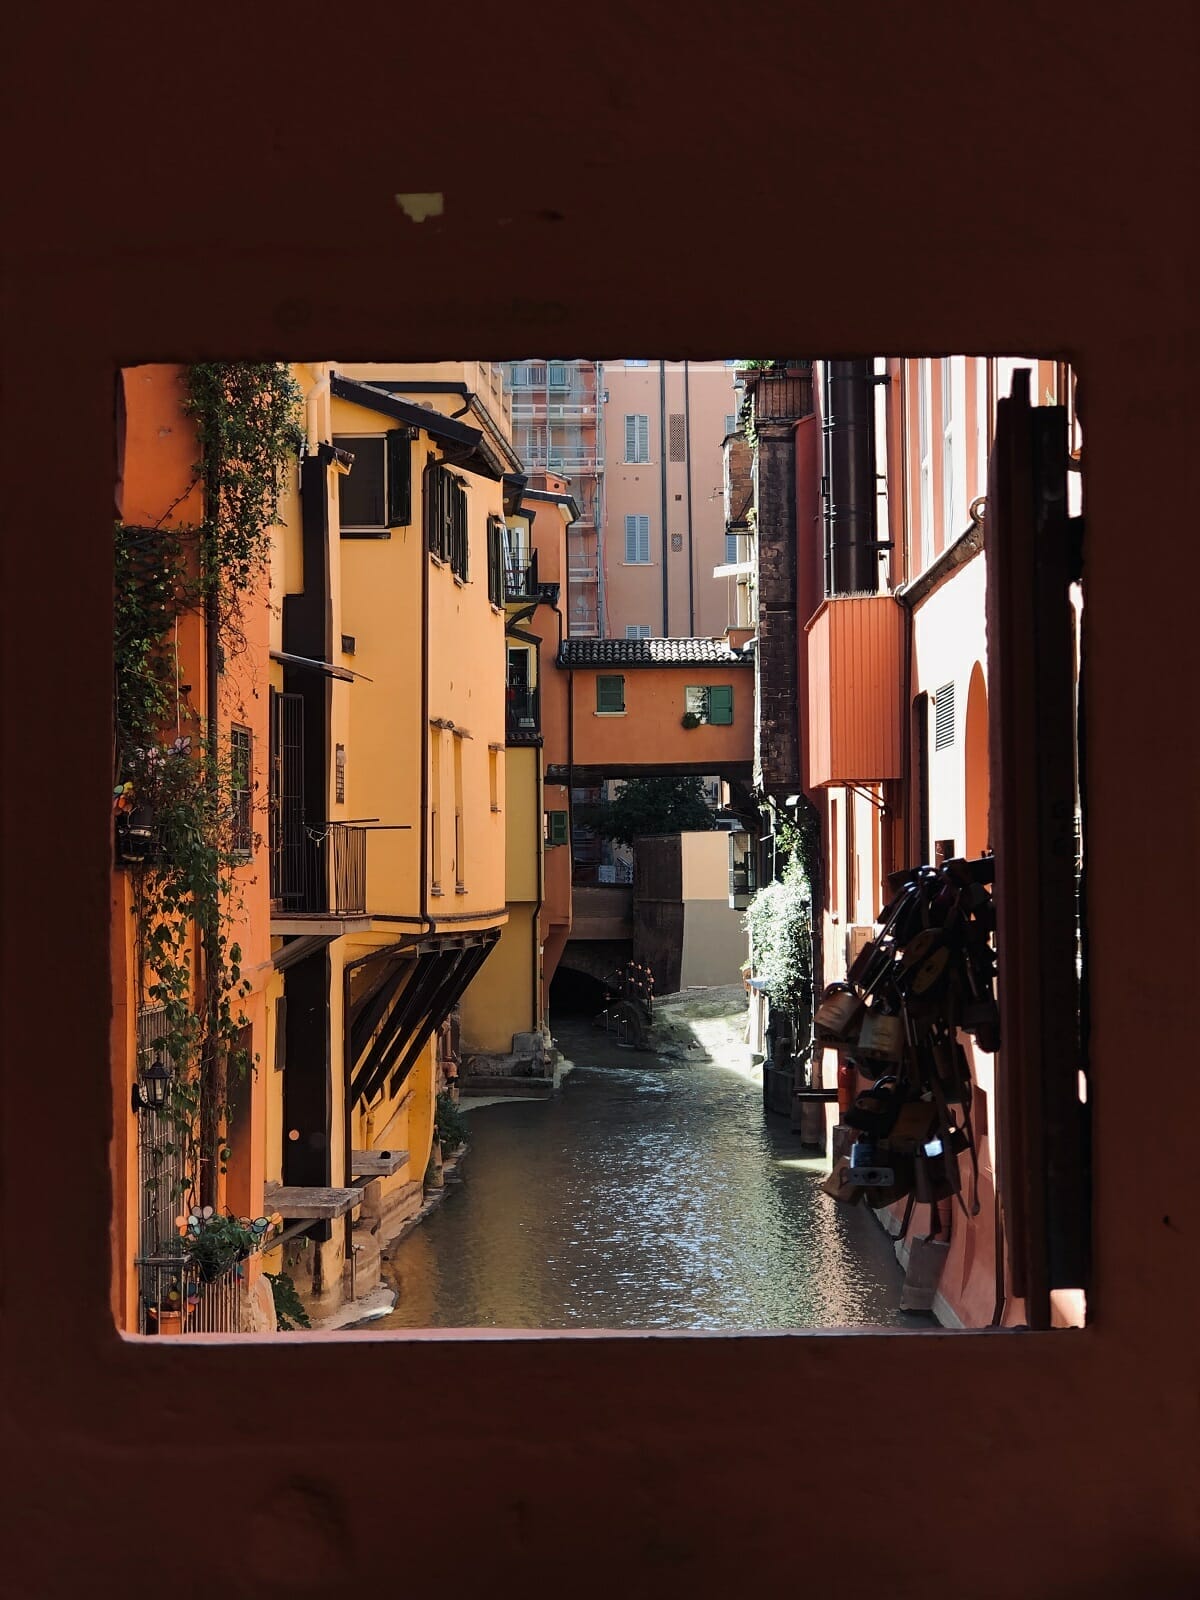 Tiny window looking out onto the canals in Bologna